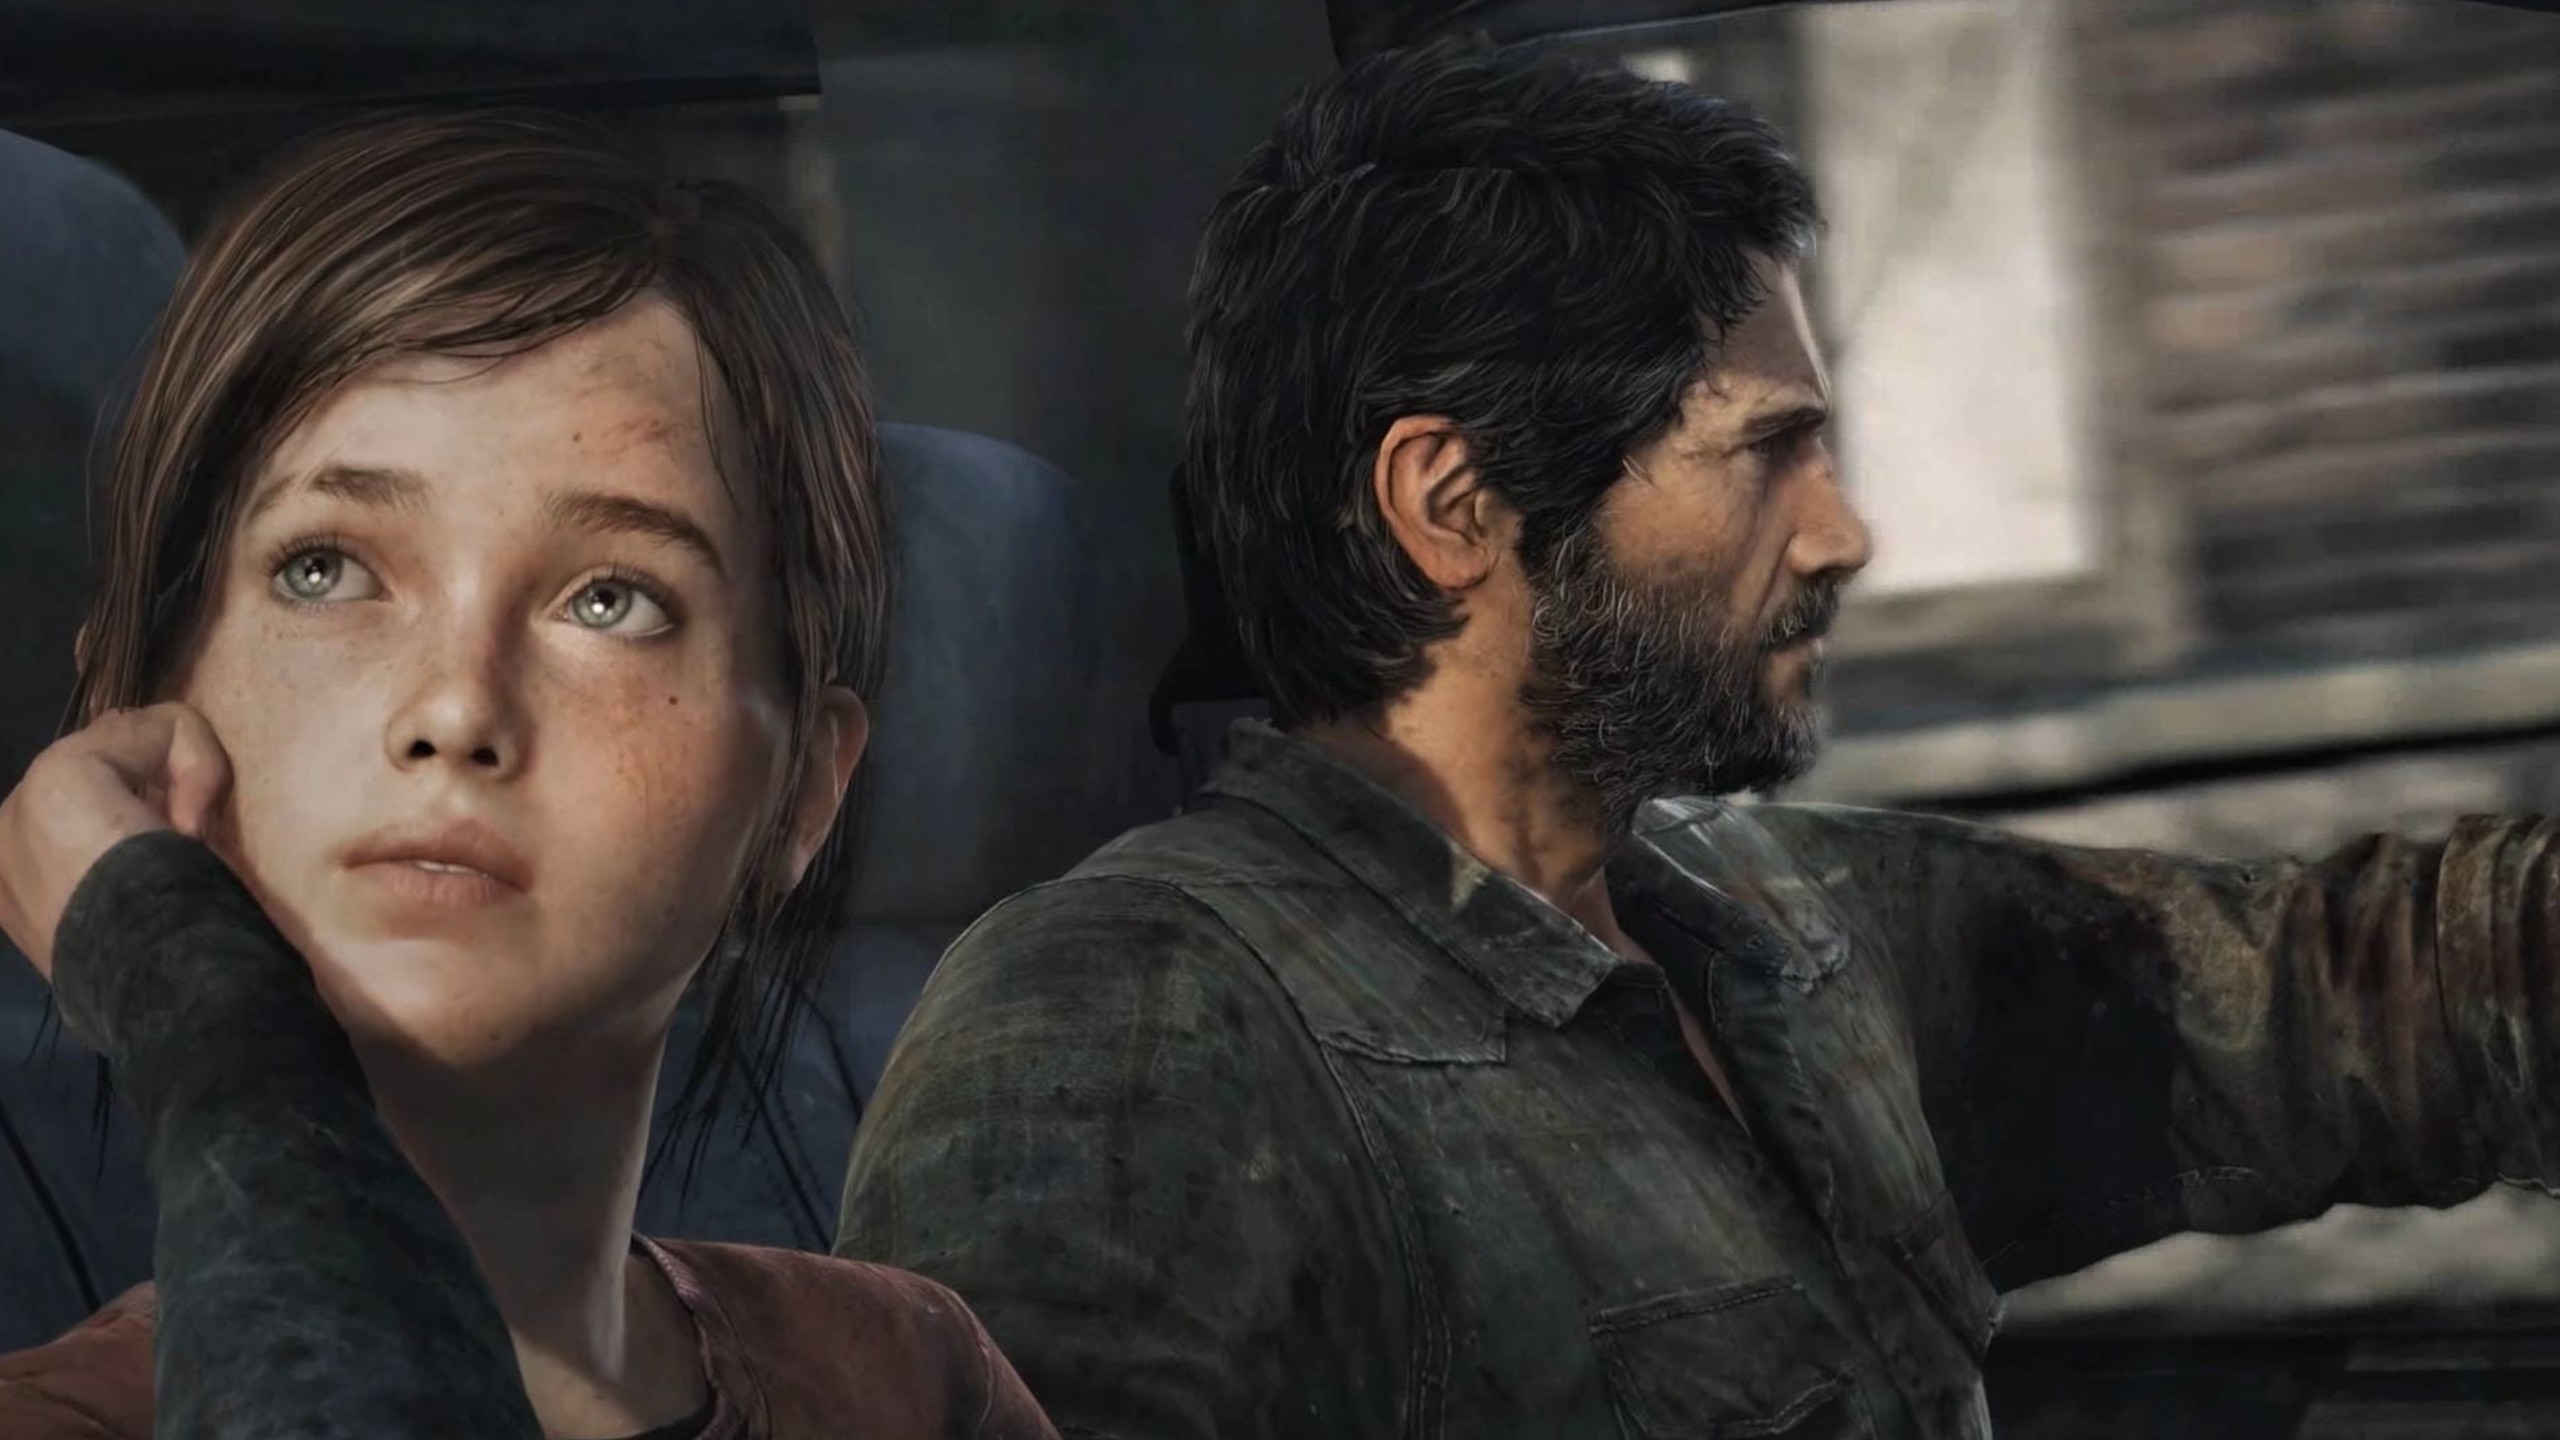 the last of us 1 download free